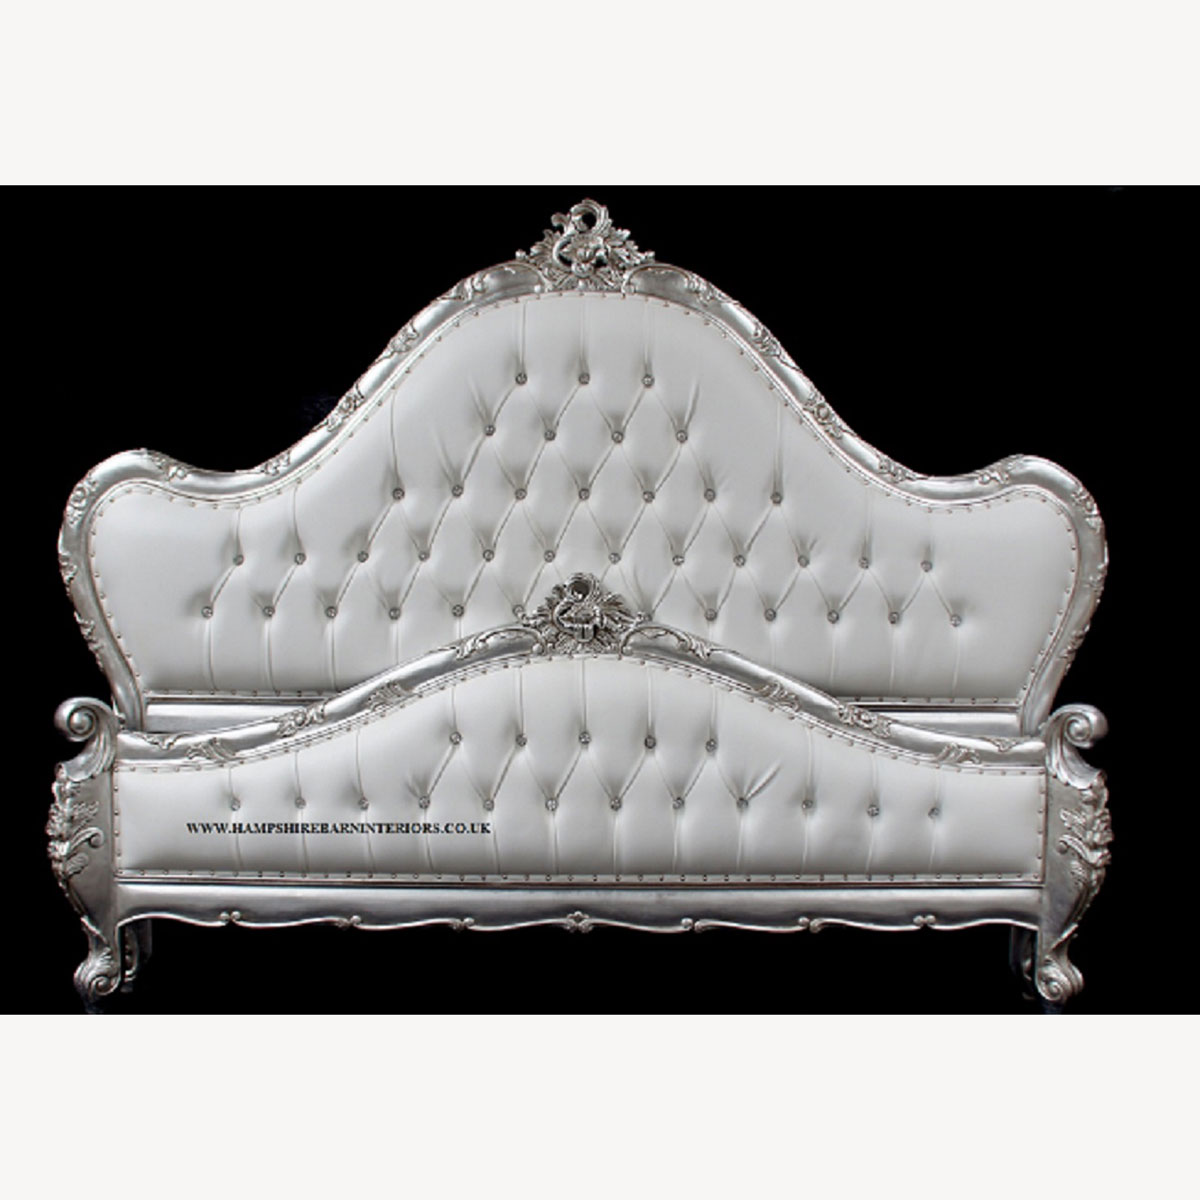 Charles French Louis Style Bed In Silver Leaf And Upholstered In A White Faux Leather Fabric Crystal Buttons 1 - Hampshire Barn Interiors - Charles French Louis Style Bed In Silver Leaf And Upholstered In A White Faux Leather Fabric Crystal Buttons -